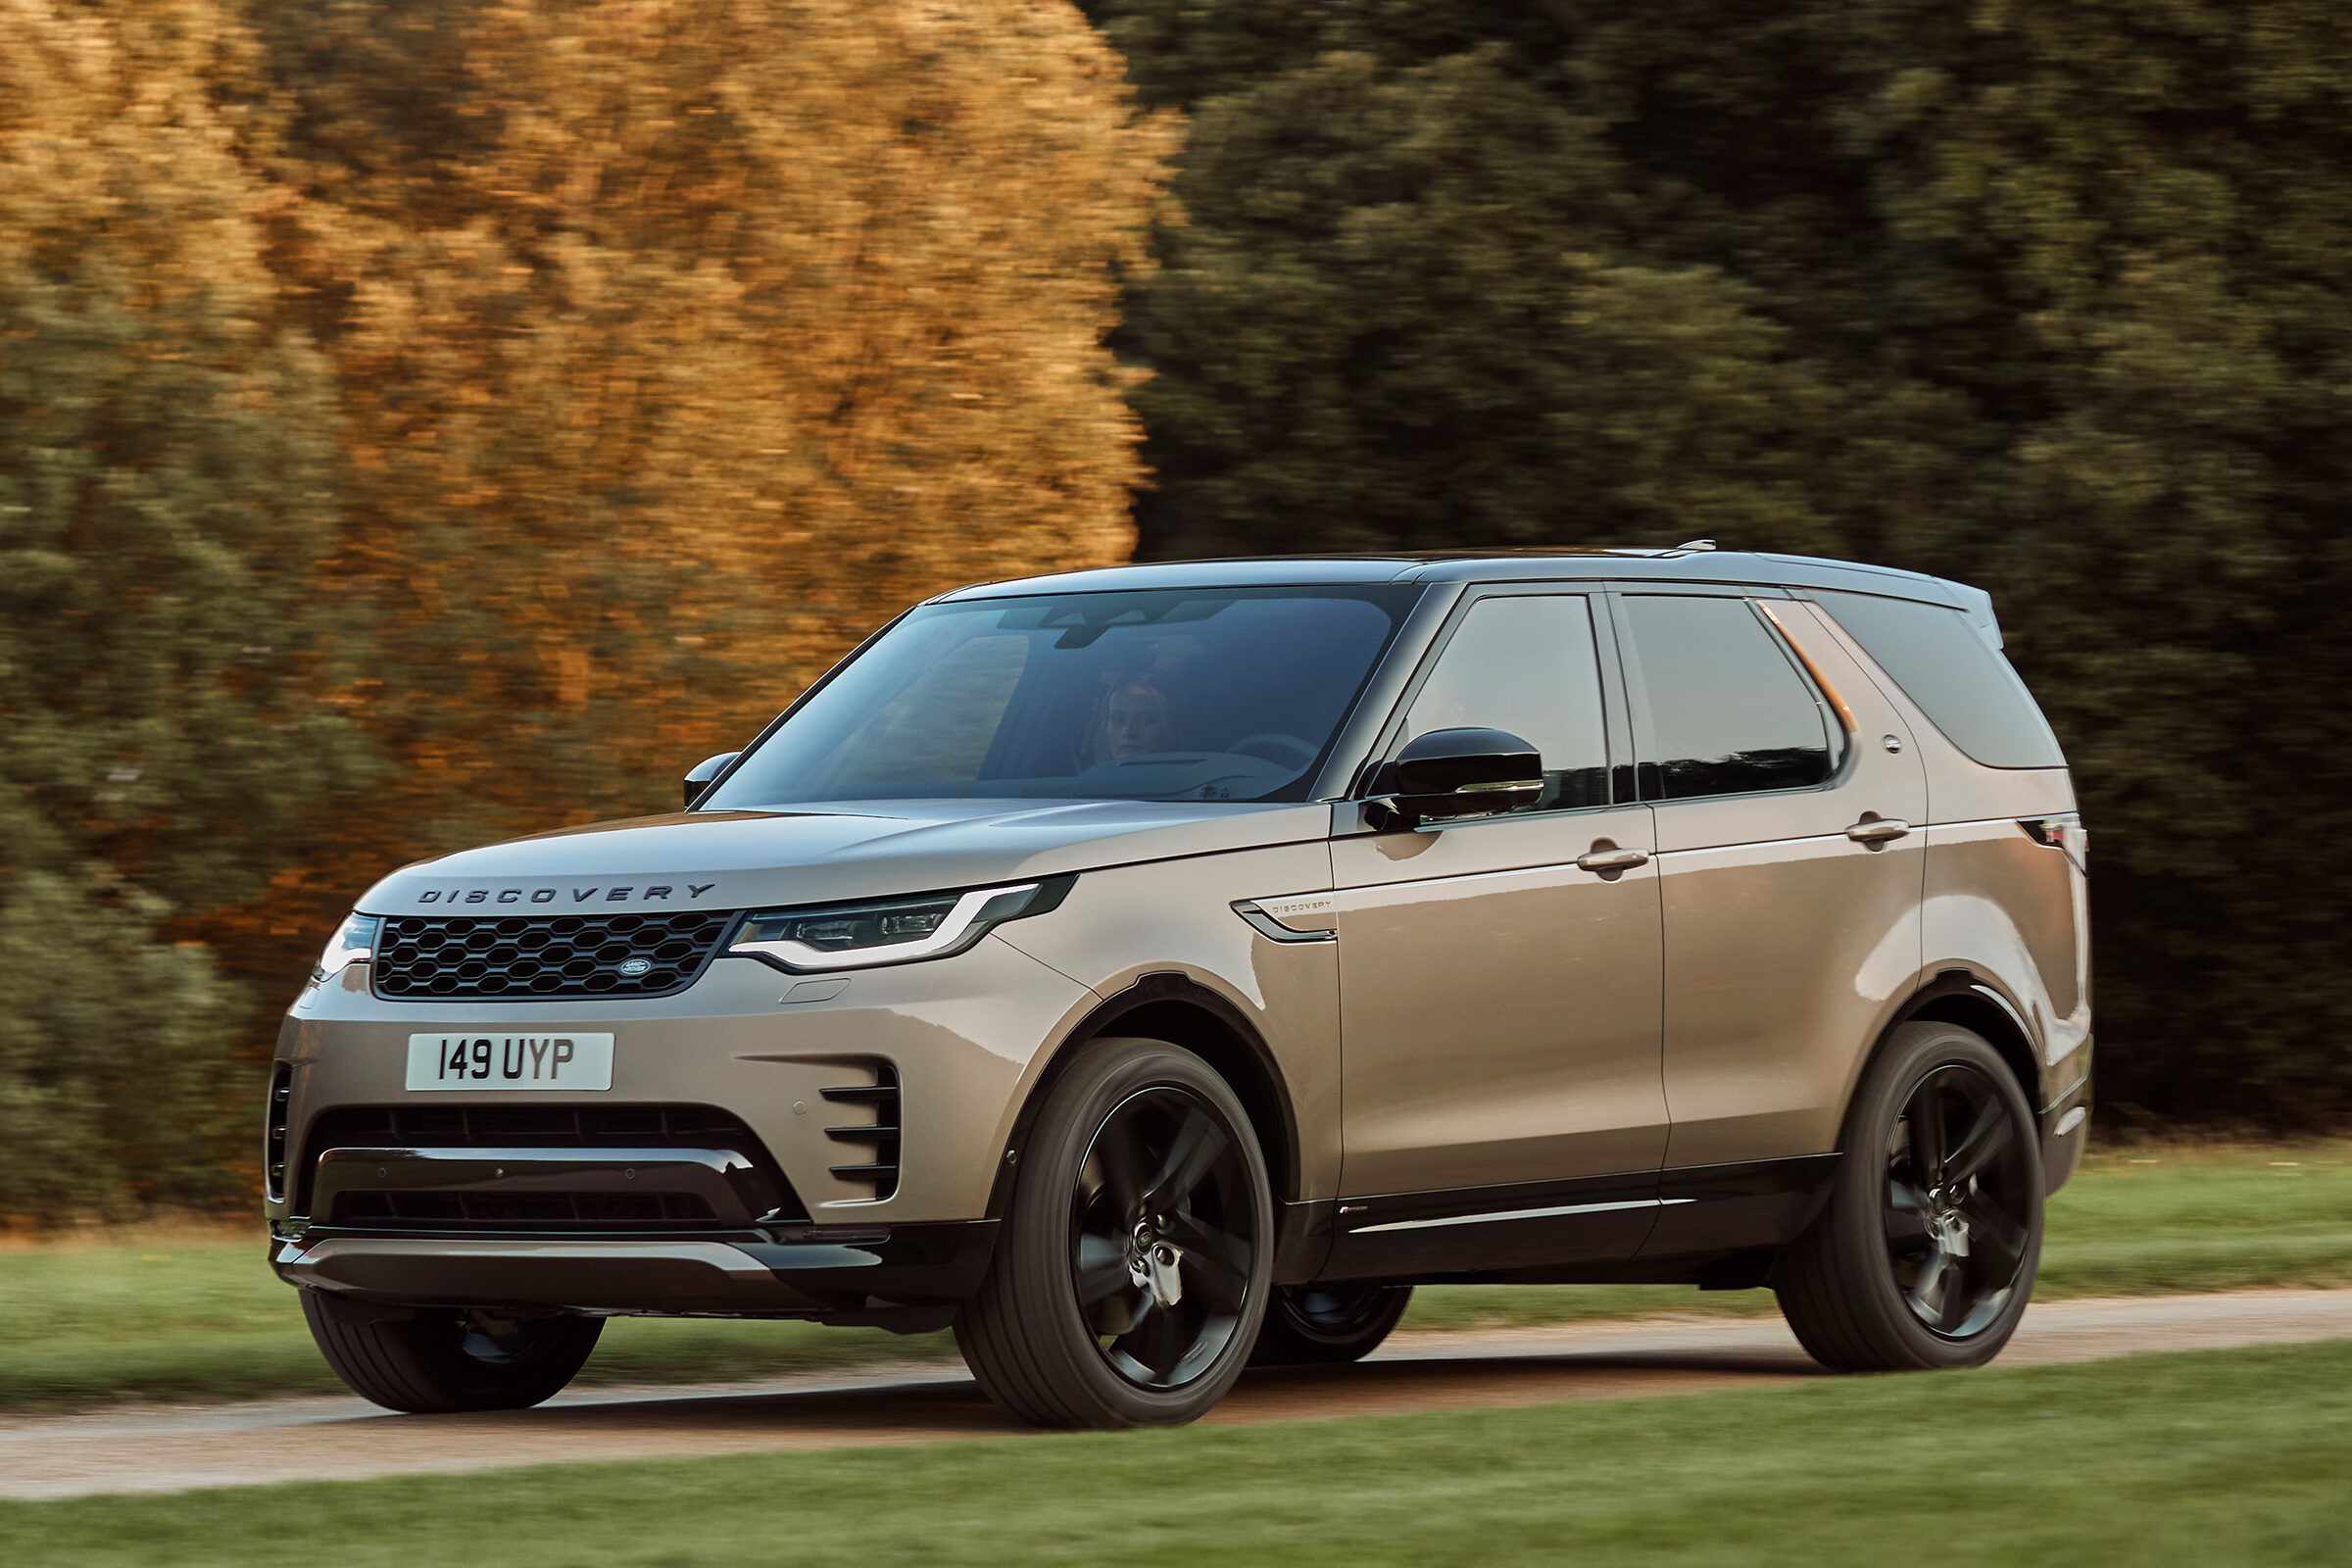 Discovery faceliftLand Rover 